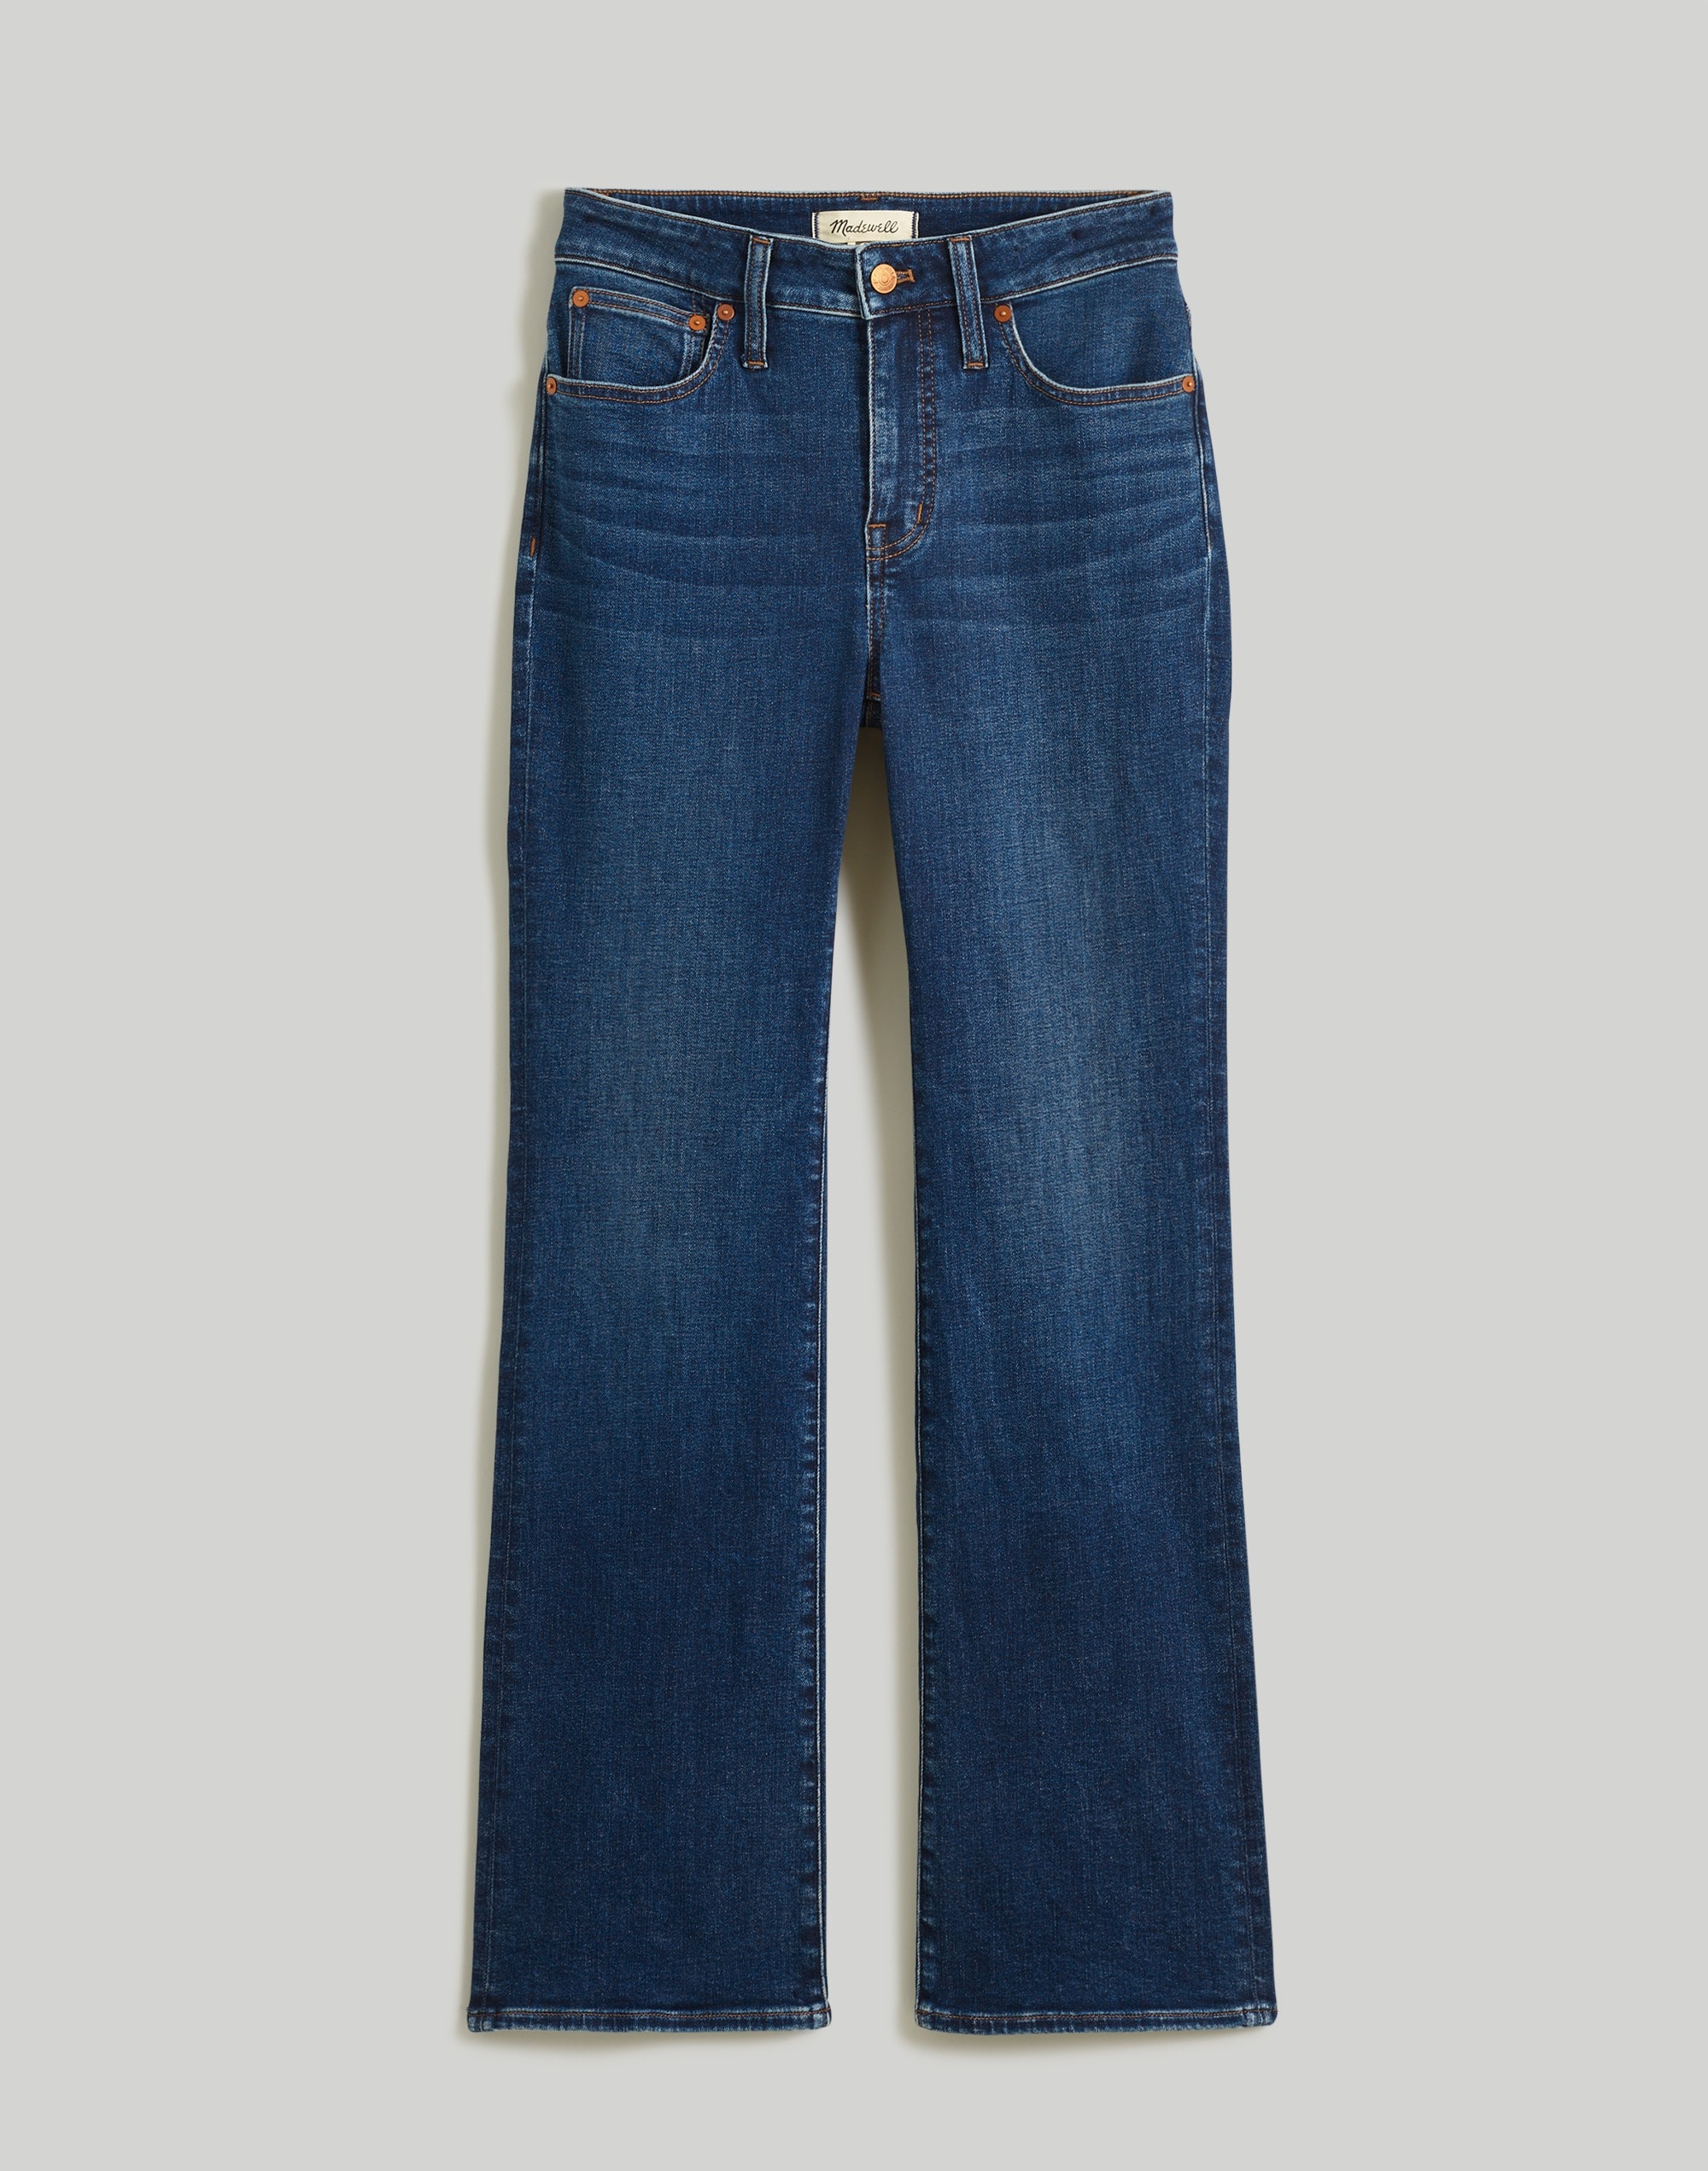 Plus Curvy Kick Out Crop Jeans in Colleton Wash